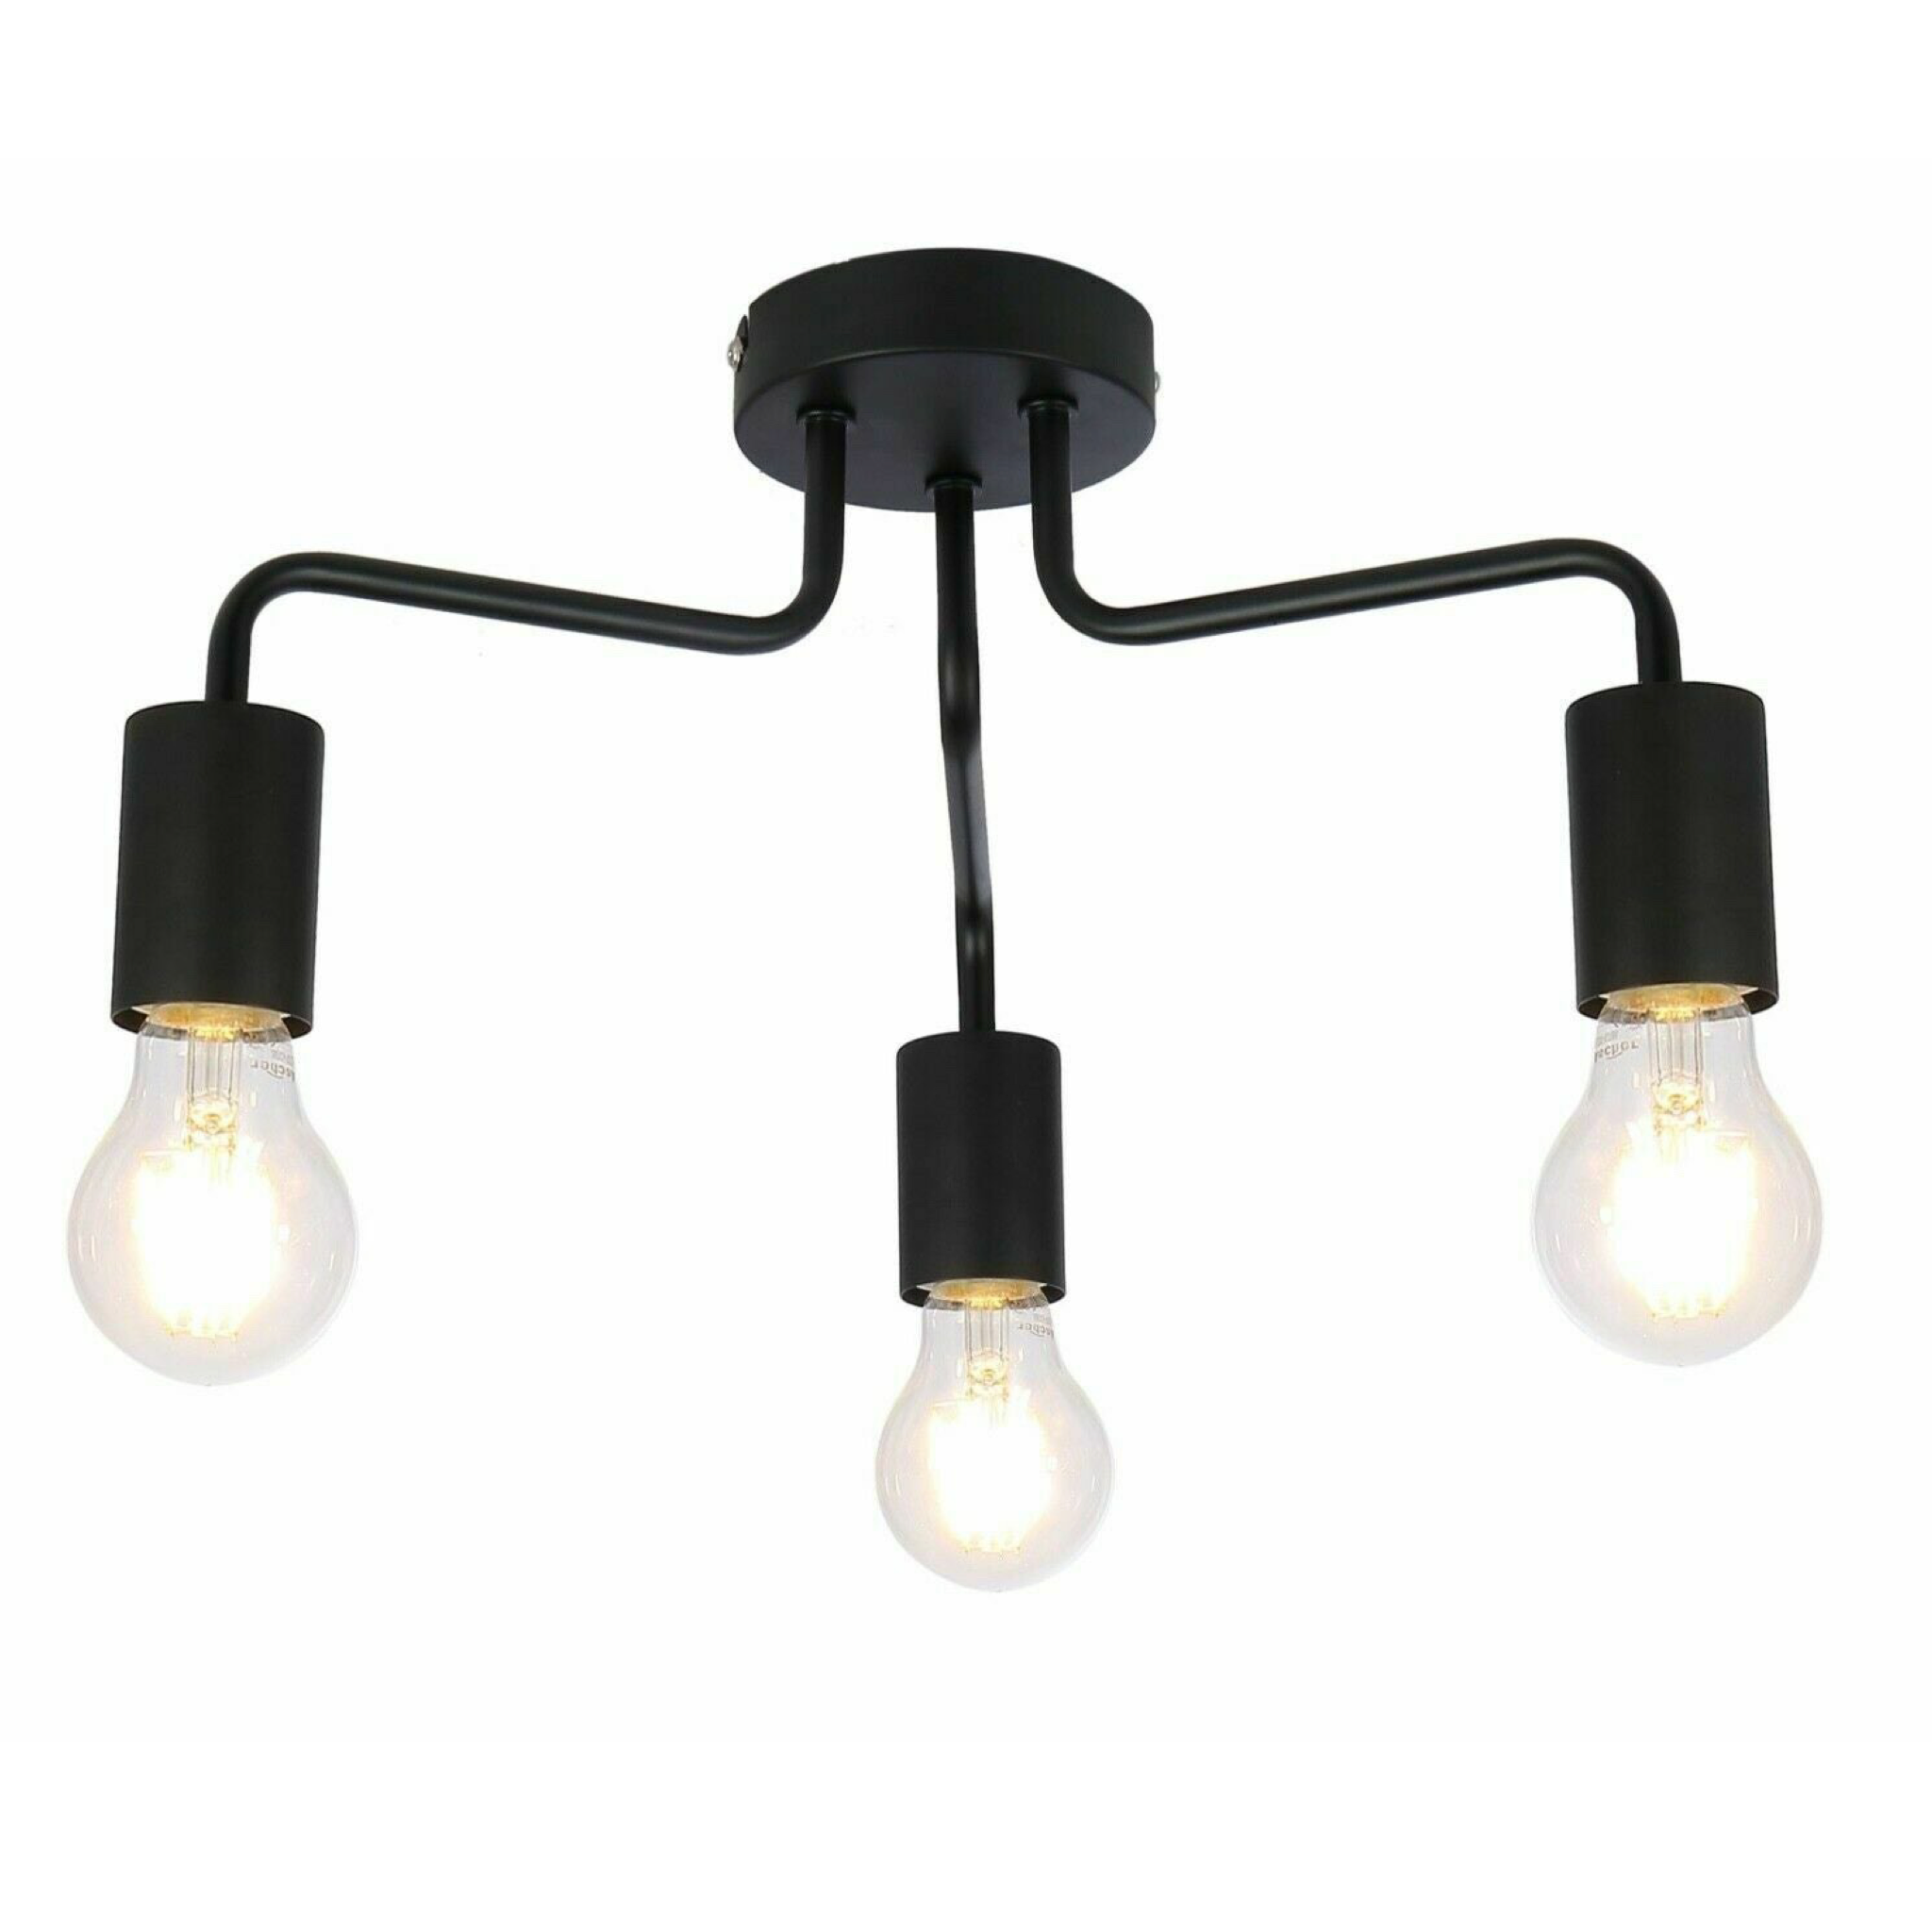 Vintage Over the Table 3 Way Ceiling Light  black  Finish E27 Fitting UKEW®